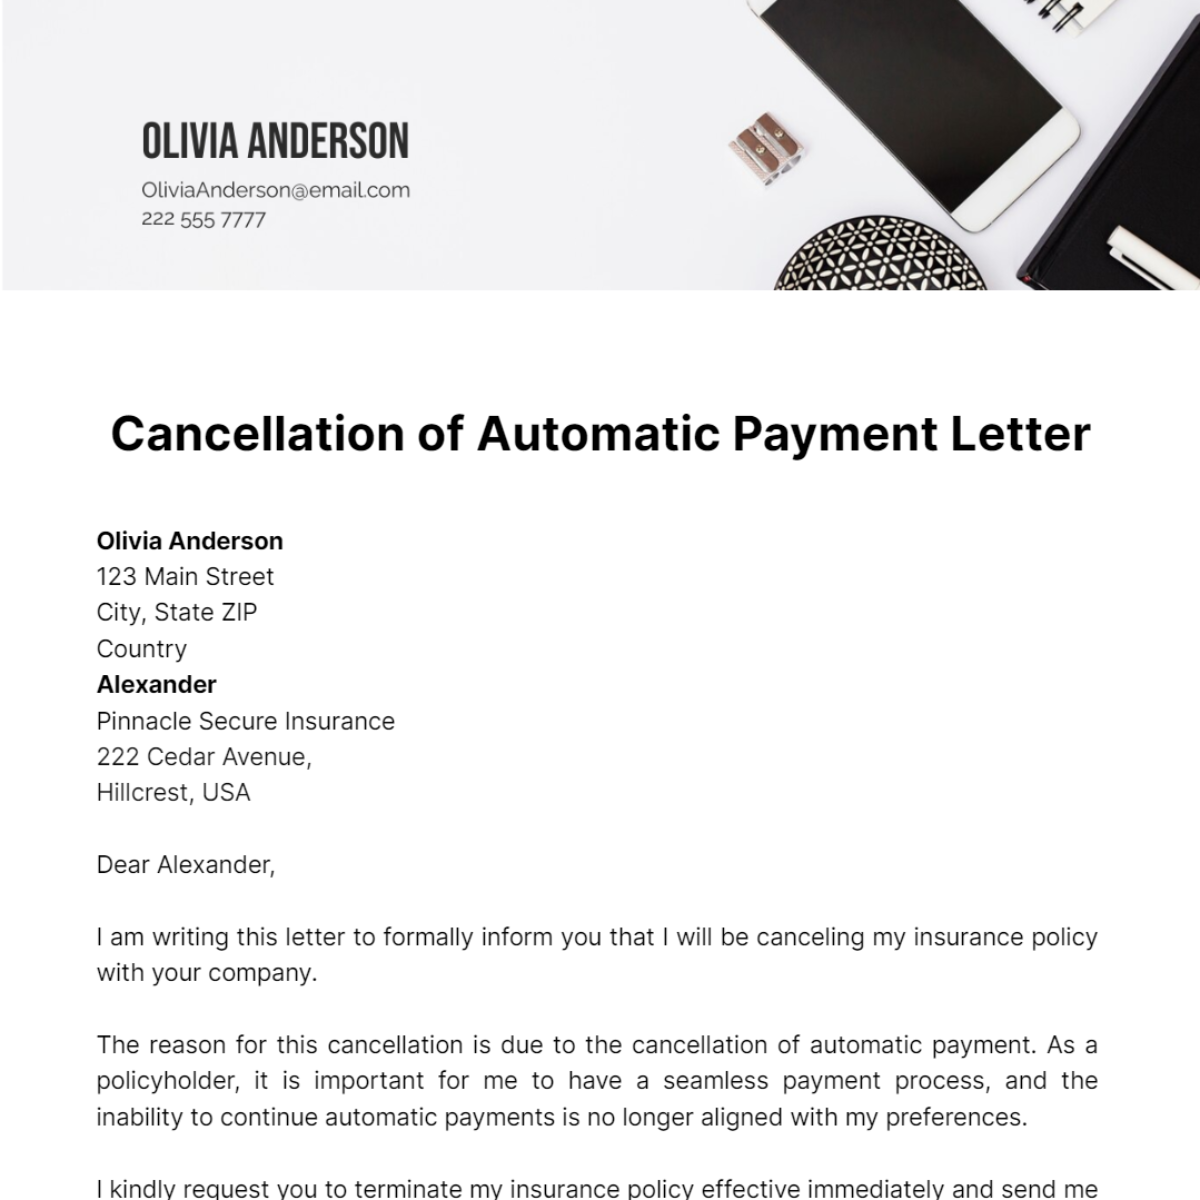 Cancellation of Automatic Payment Letter Template